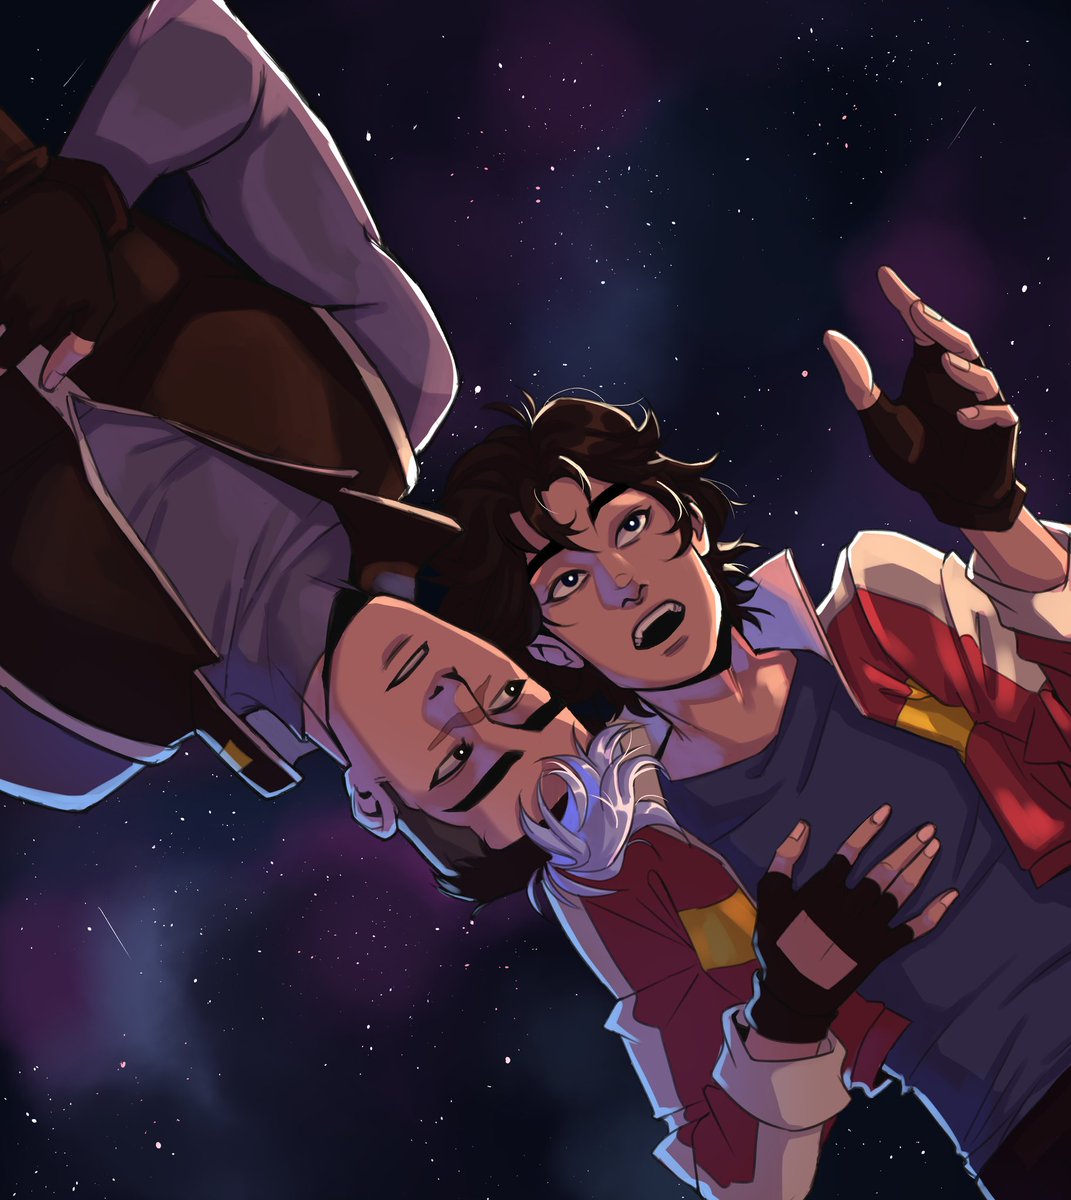 "Under the starry sky" ✨✨✨
#sheith 